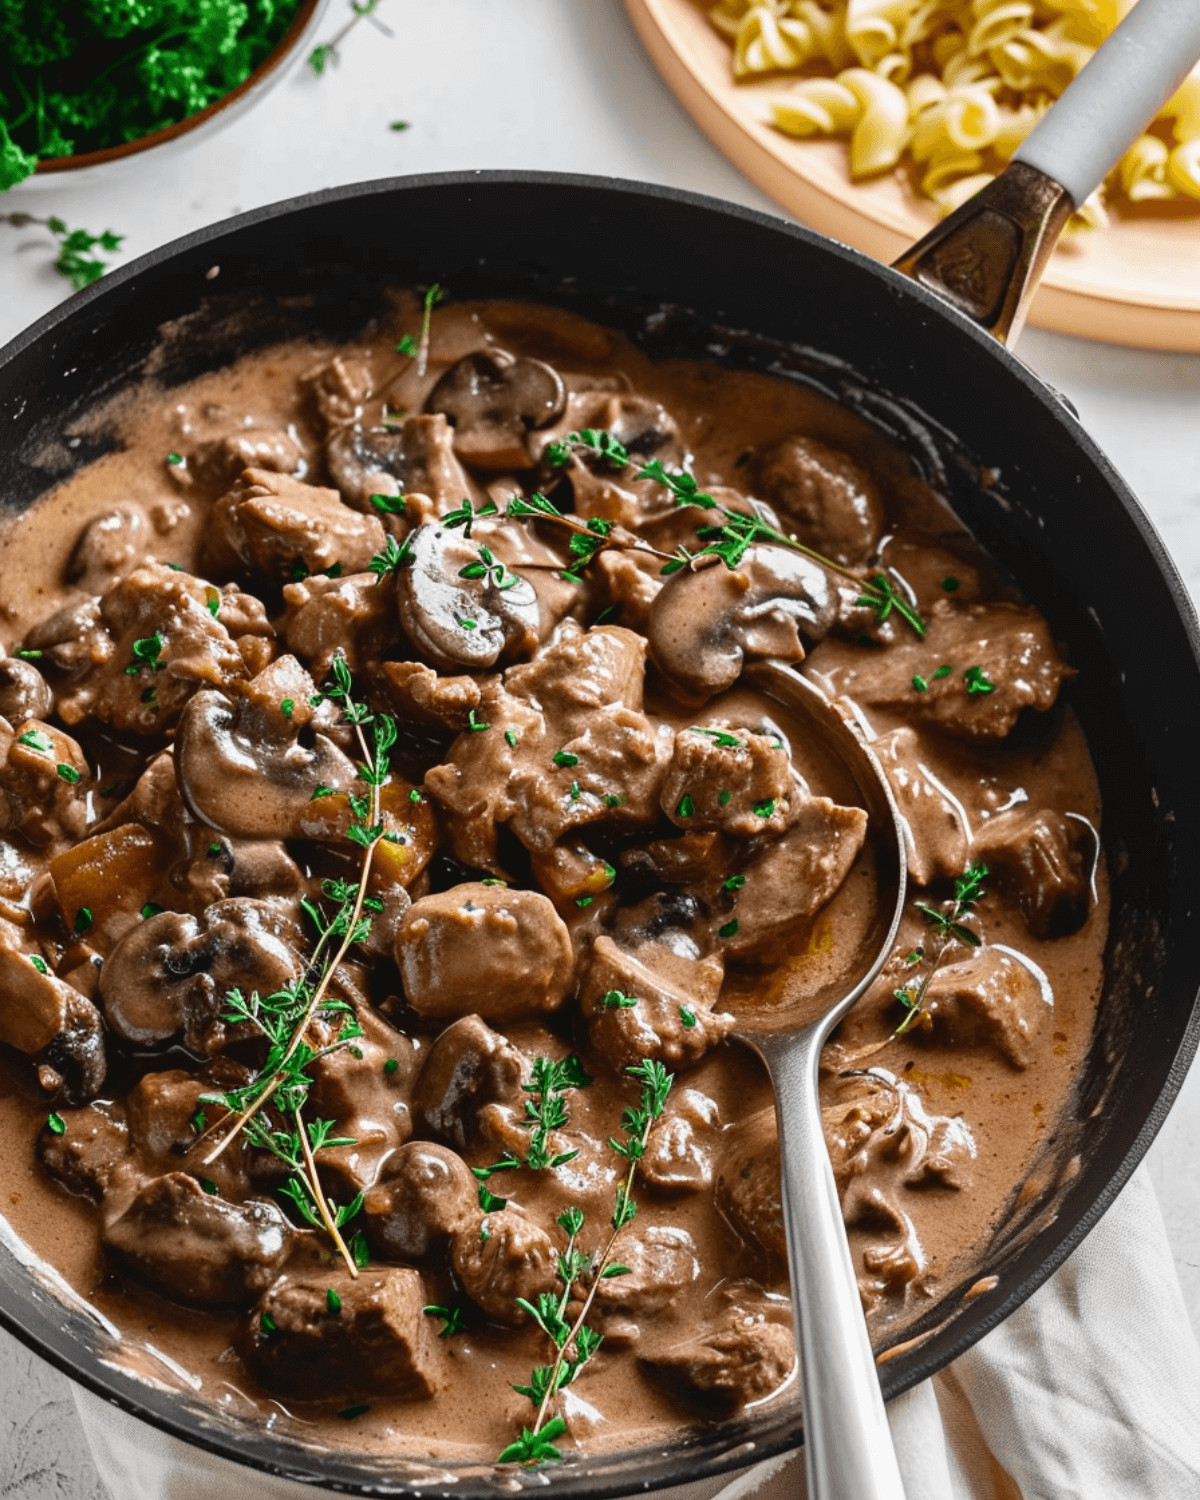 Venison stroganoff in a skillet with mushrooms and pasta.